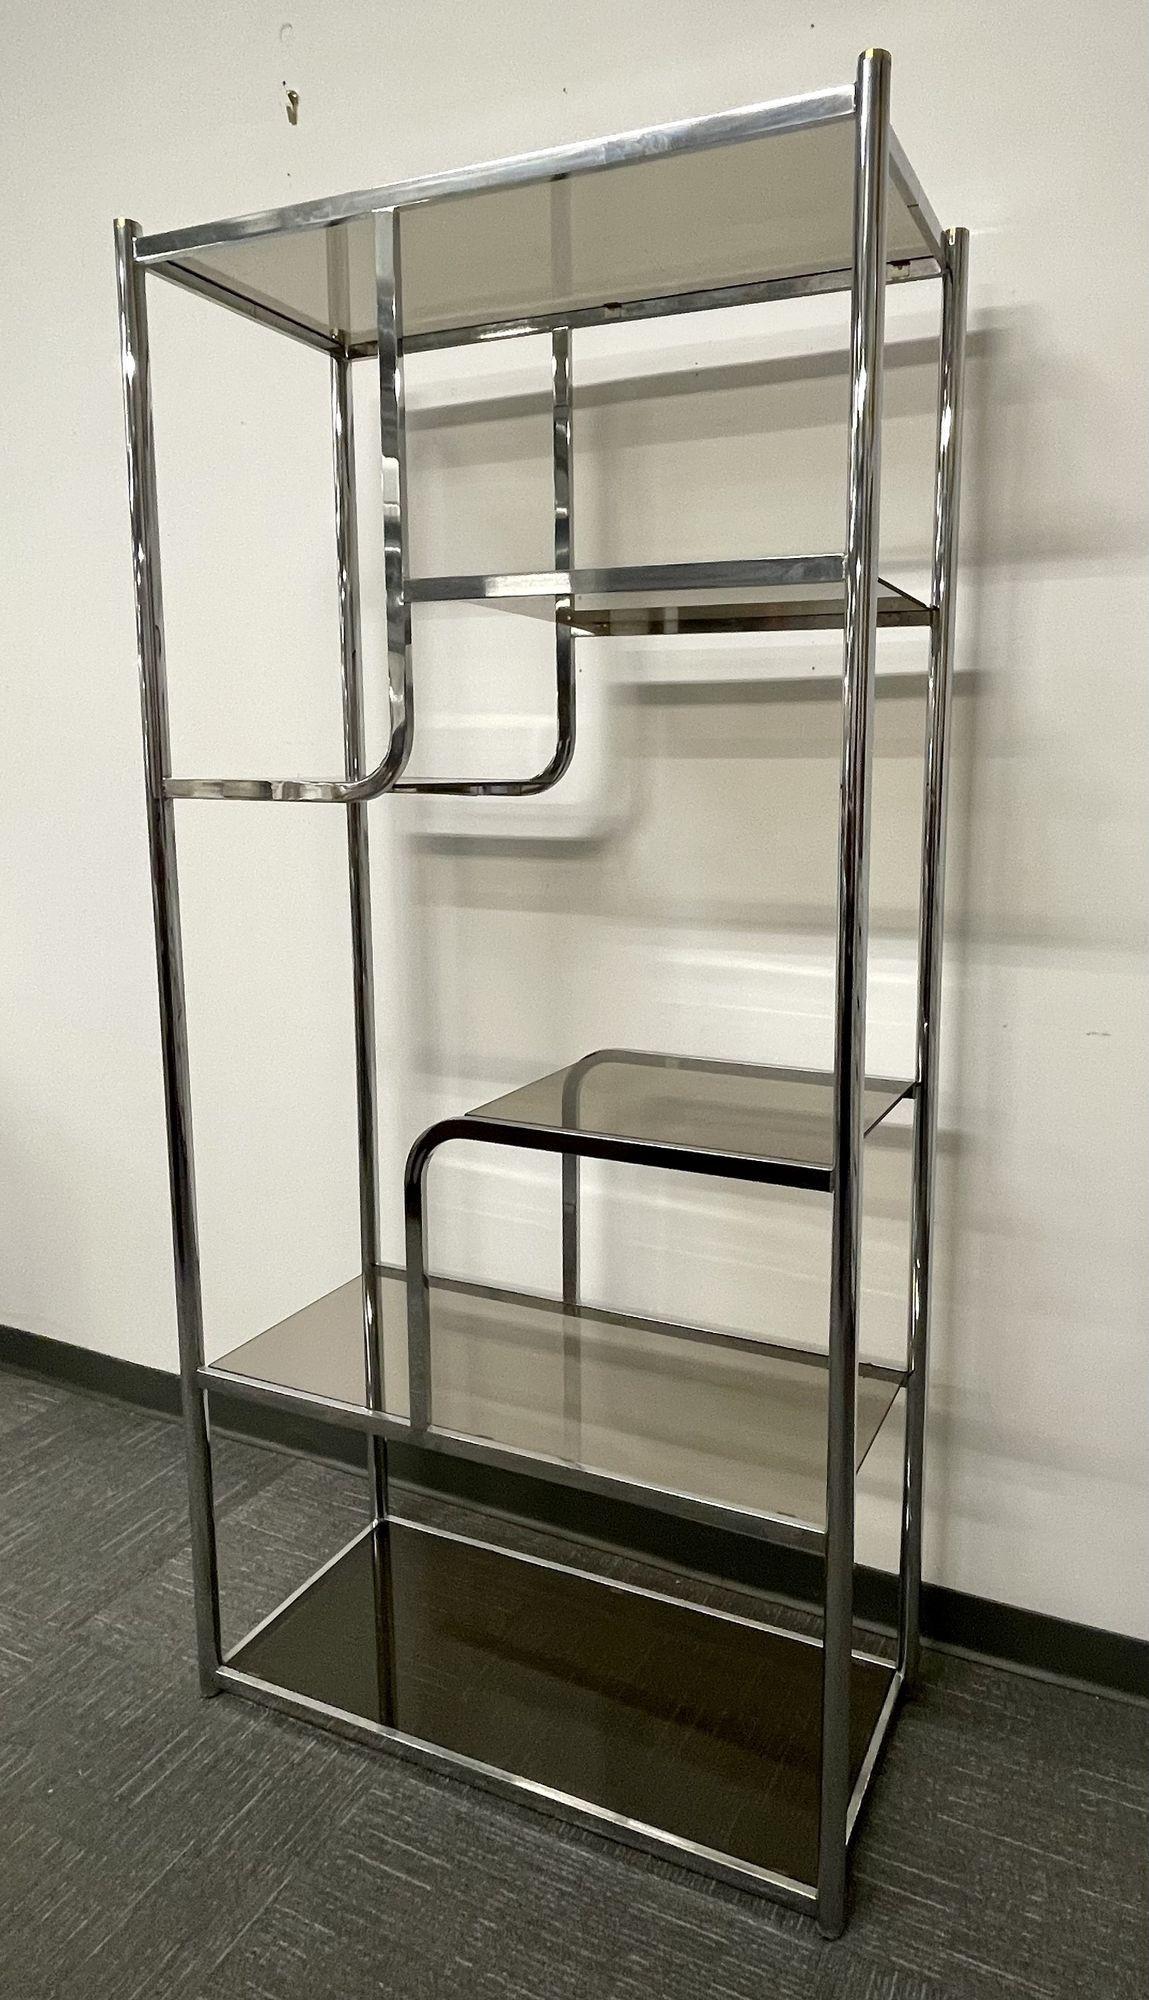 Mid-Century Modern smoke glass and chrome etagere, bookcase, wall unit.
 
A untiquely shaped chrome etagere or bookcase, wall unit having a chrome frame and smoked glass shelving.